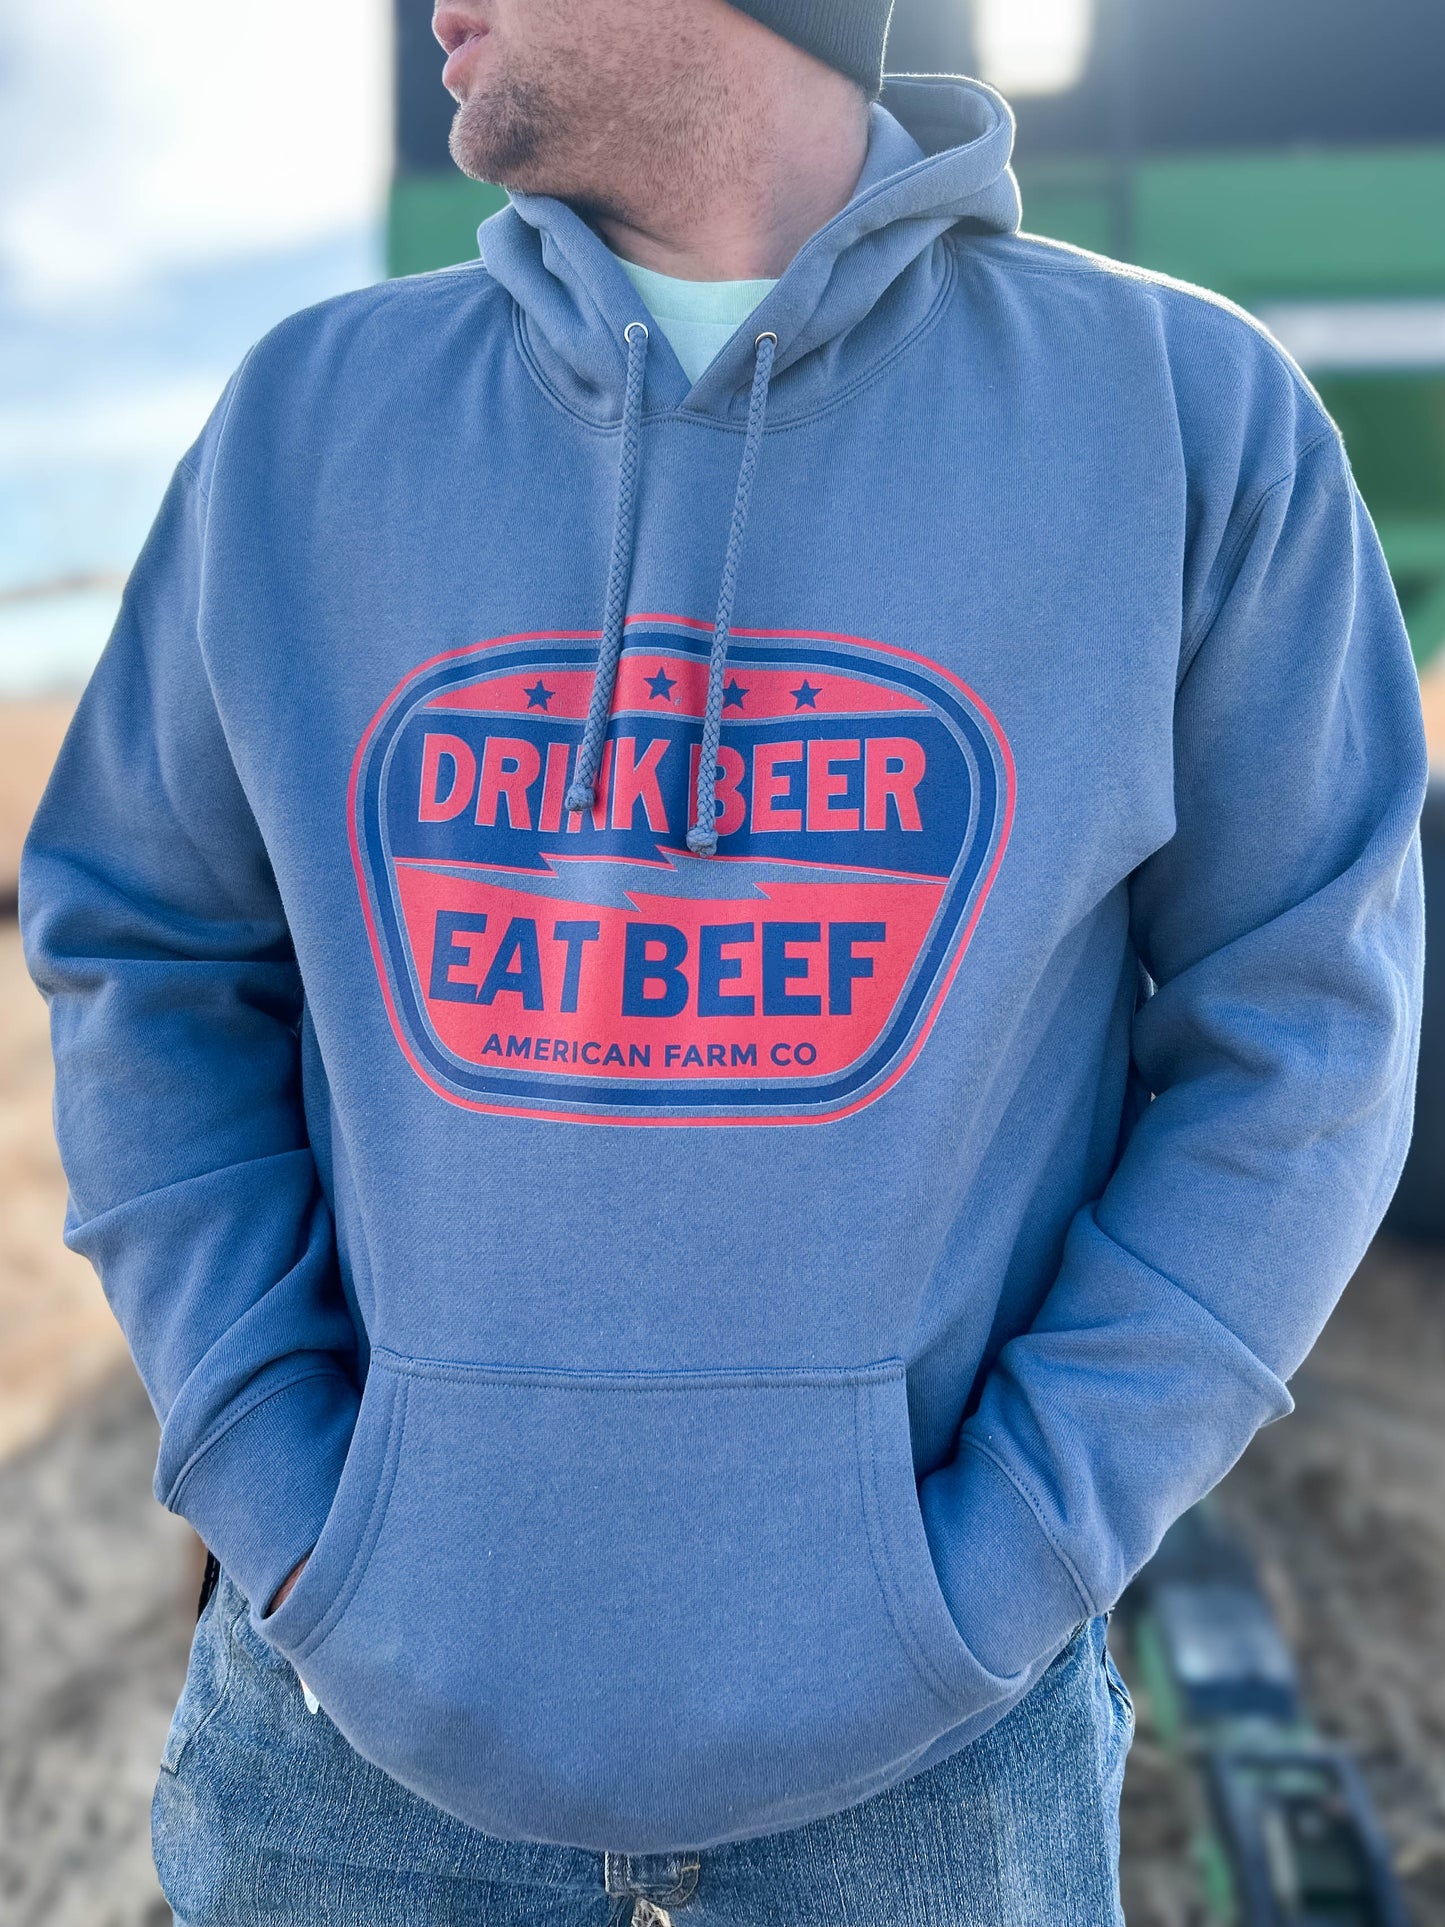 Another shot view of a man wearing a Eat Beef Hoodie in the field